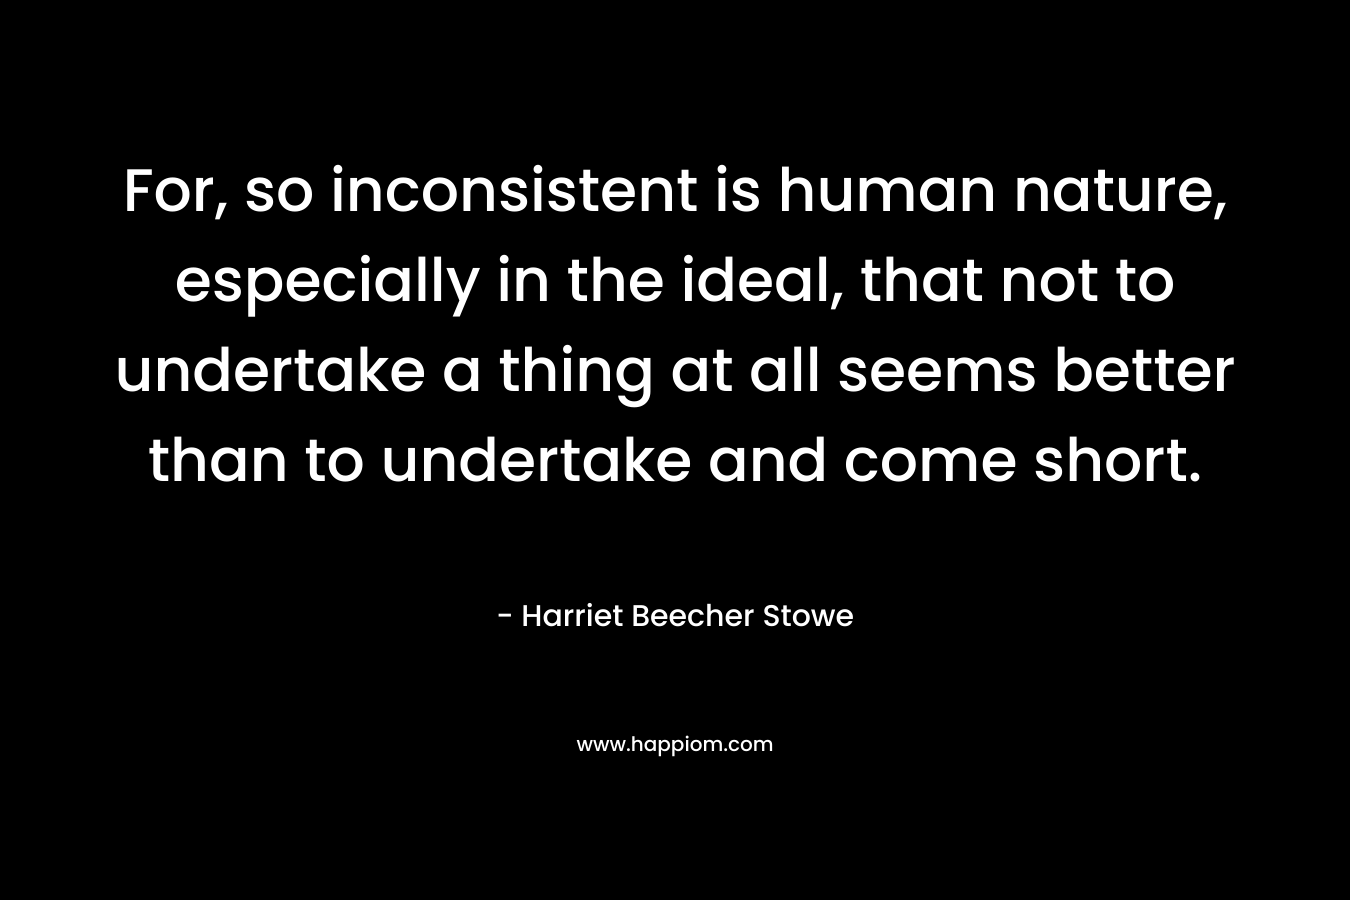 For, so inconsistent is human nature, especially in the ideal, that not to undertake a thing at all seems better than to undertake and come short. – Harriet Beecher Stowe